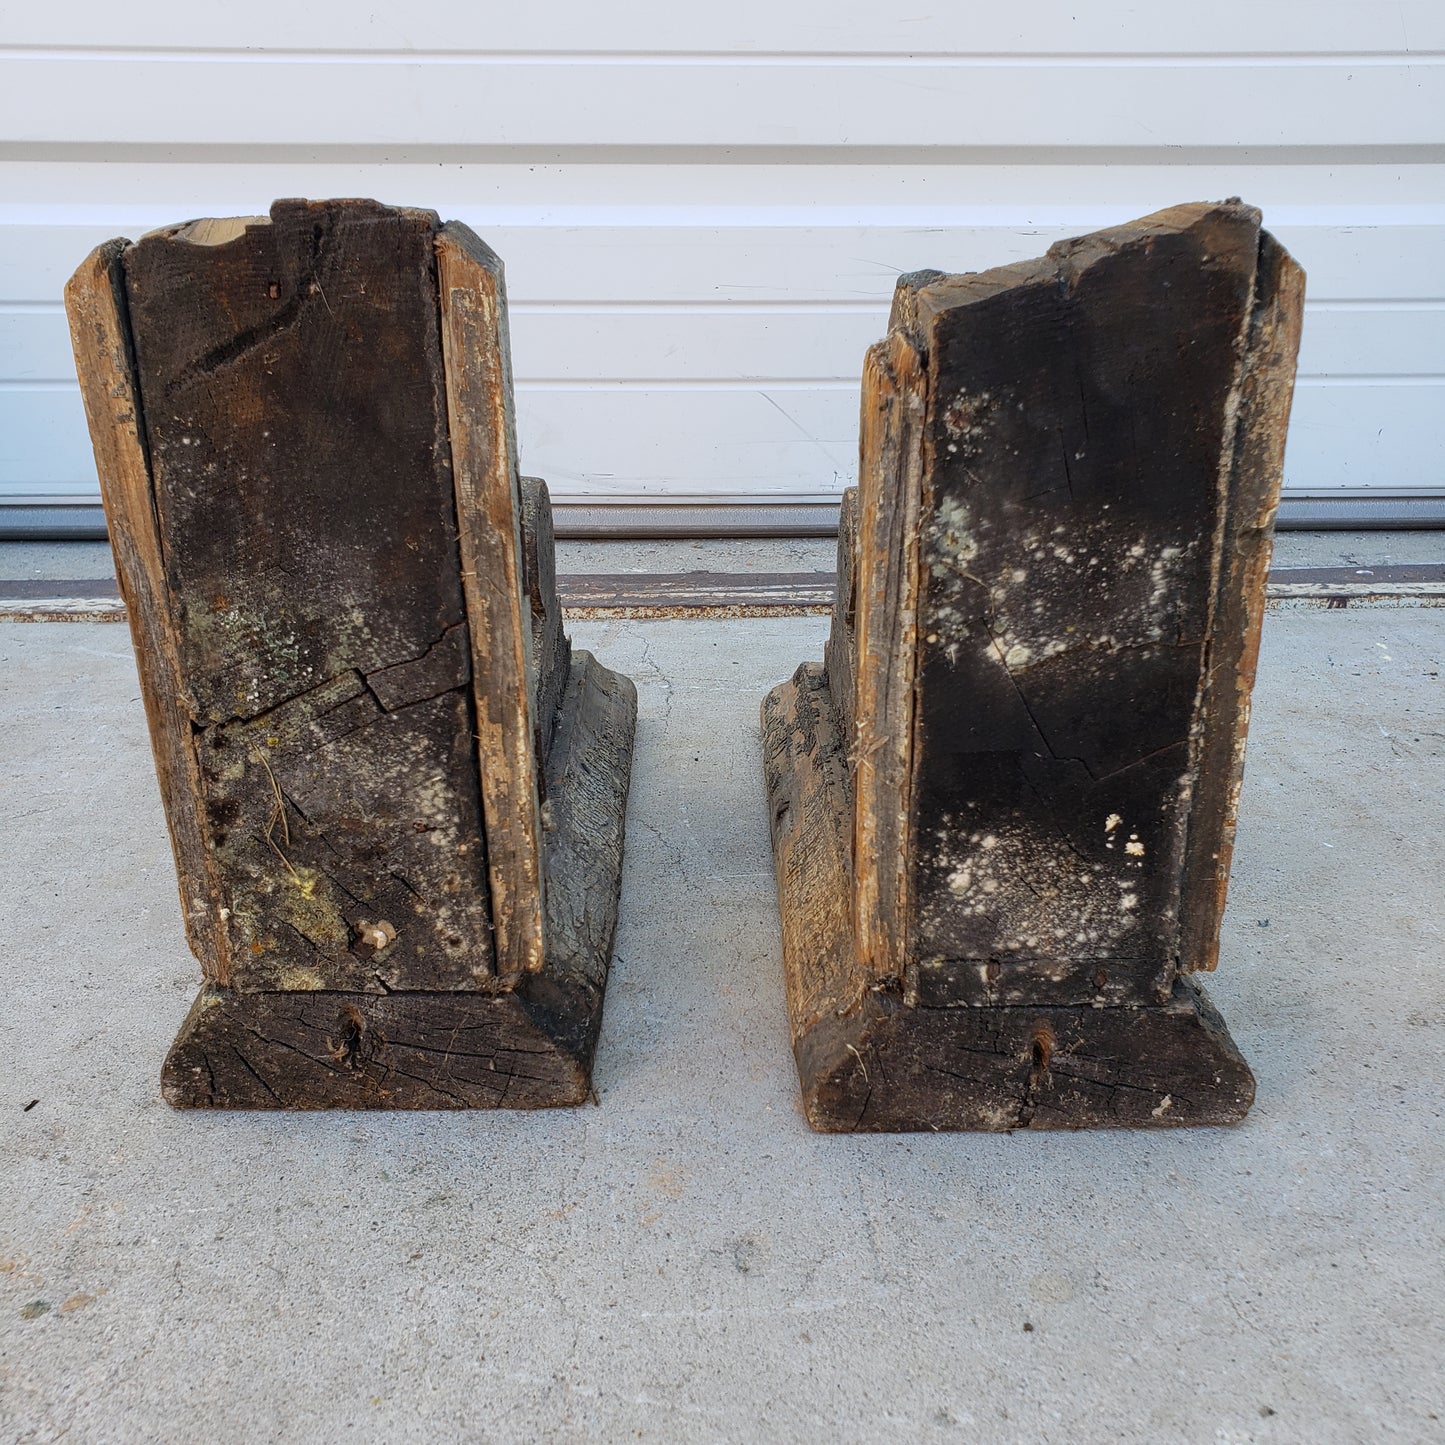 Pair of Small Wooden Corbels